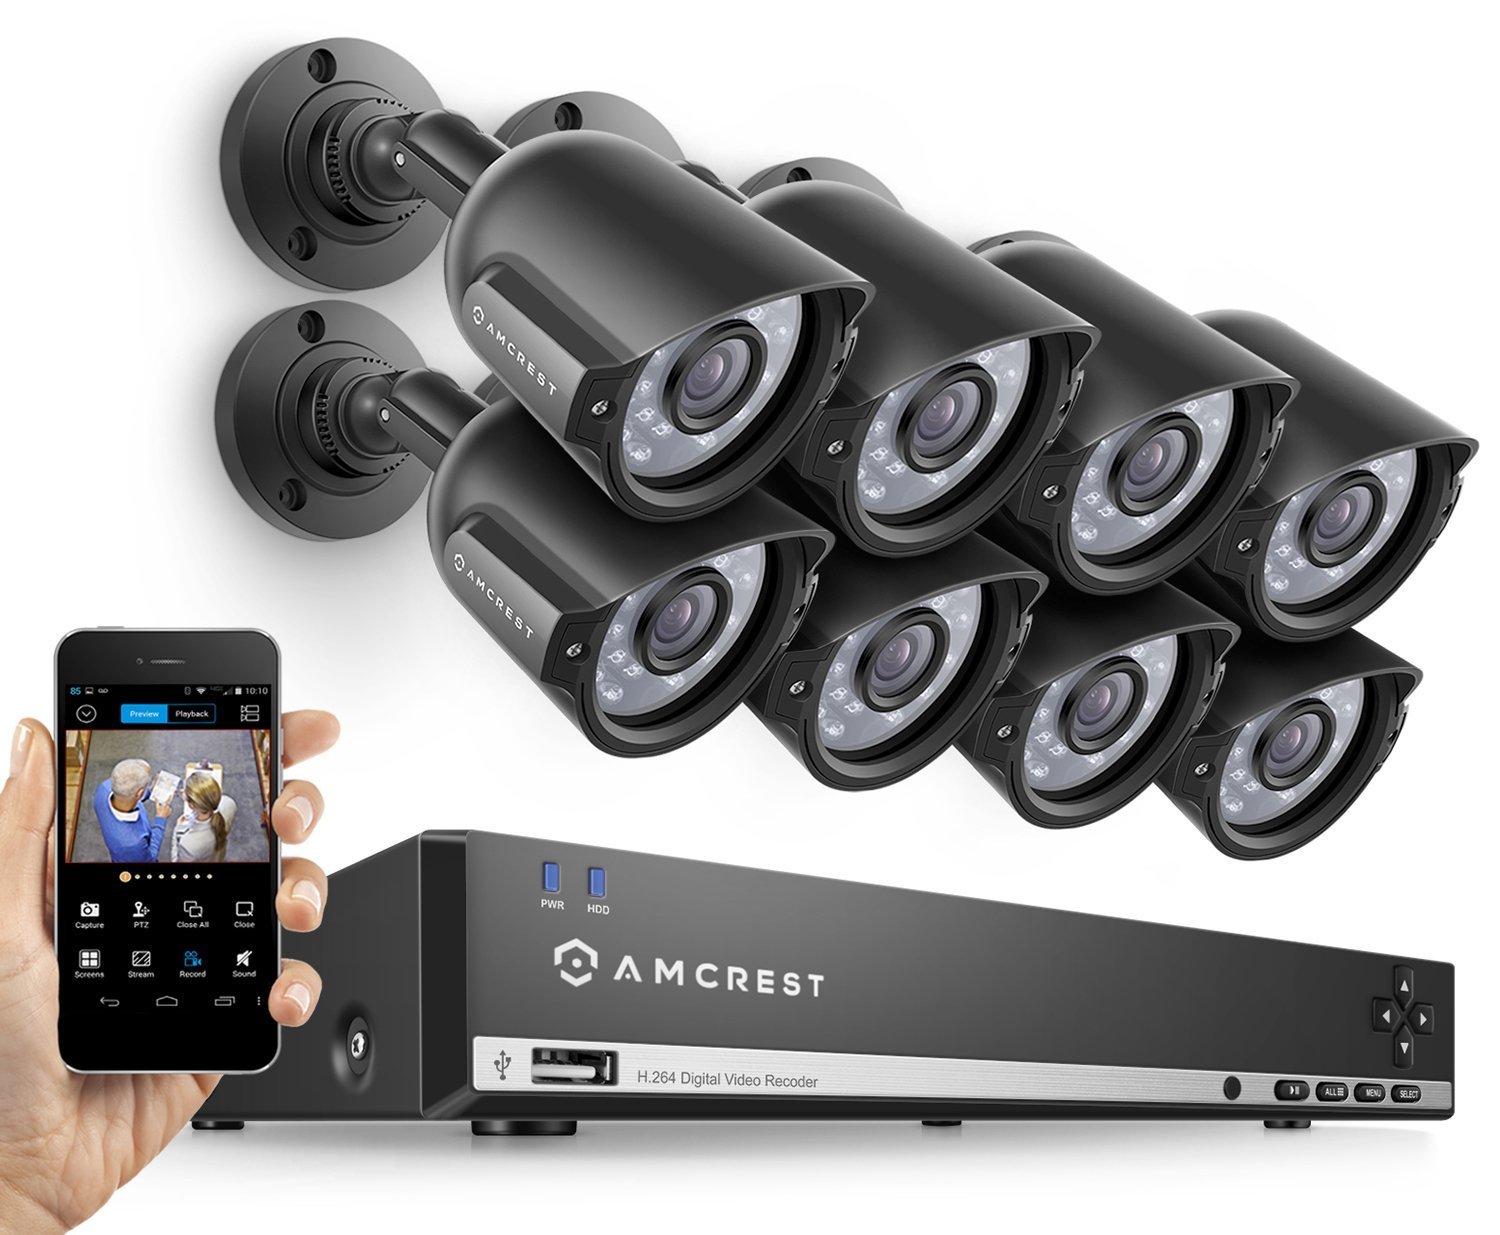 8 Channel Tribrid Security Surveillance DVR with Analog @960H and HD-CVI and 2 IP Channels @up to 1080p ALL IN ONE 1TB HARD DRIVE 